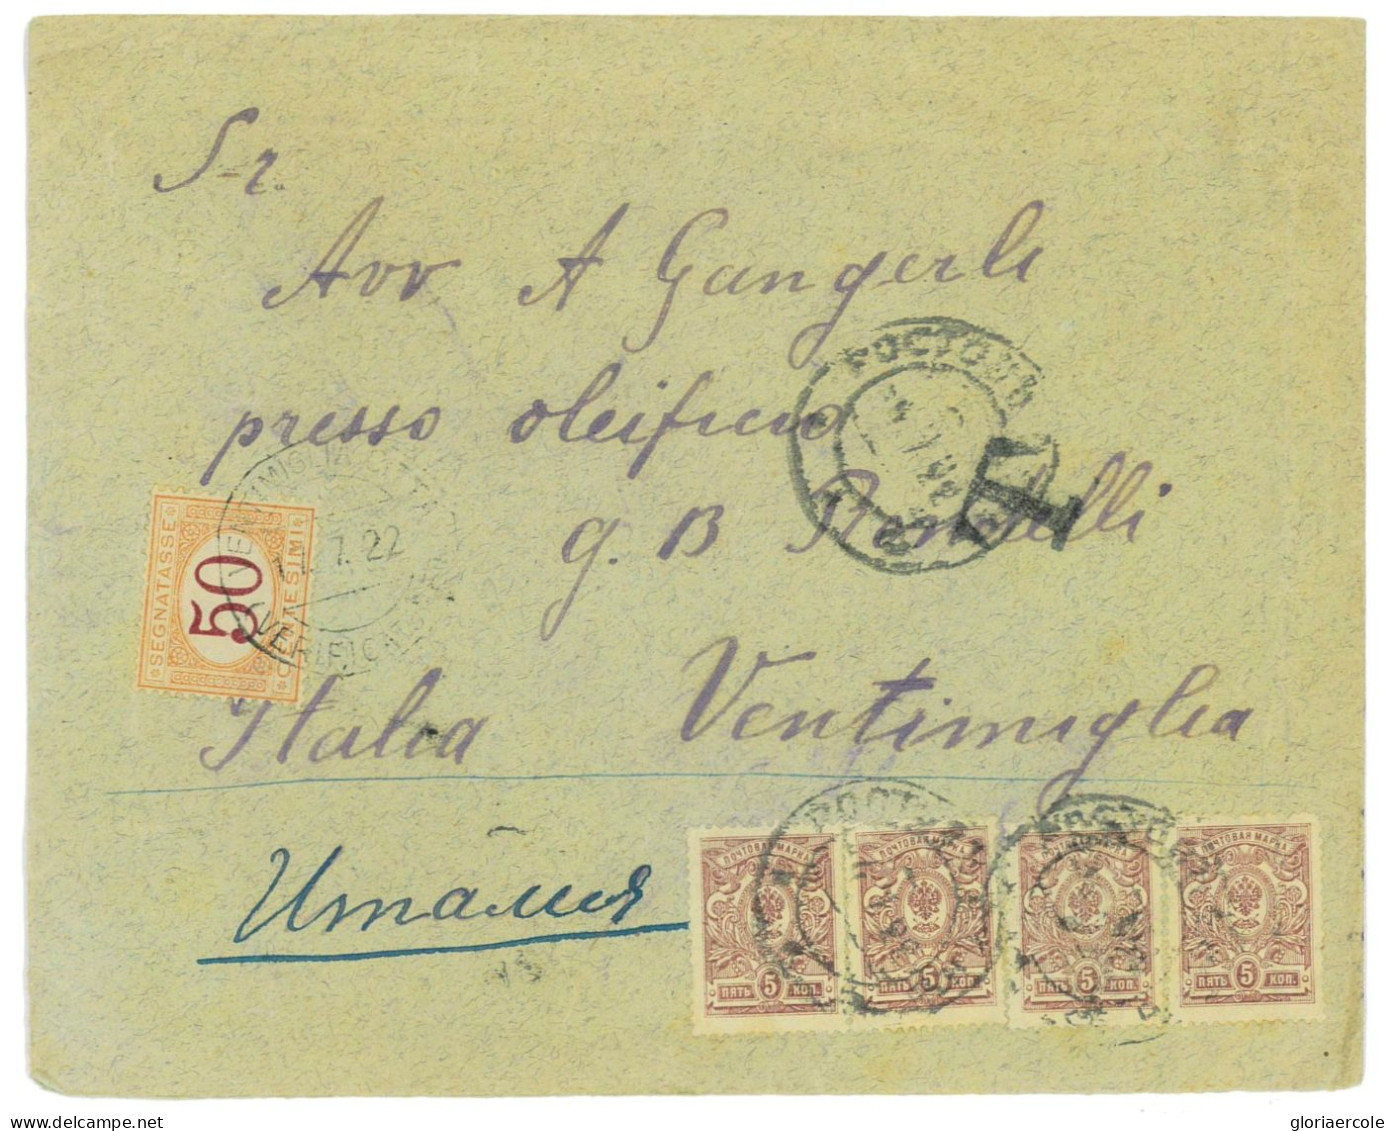 P2922 - RUSSIA, 1922, LETTER, FRANKED WITH ONLY 20 KOPEK TO ITALY, TAXED ON ARRIVAL 50 CENT. - Covers & Documents